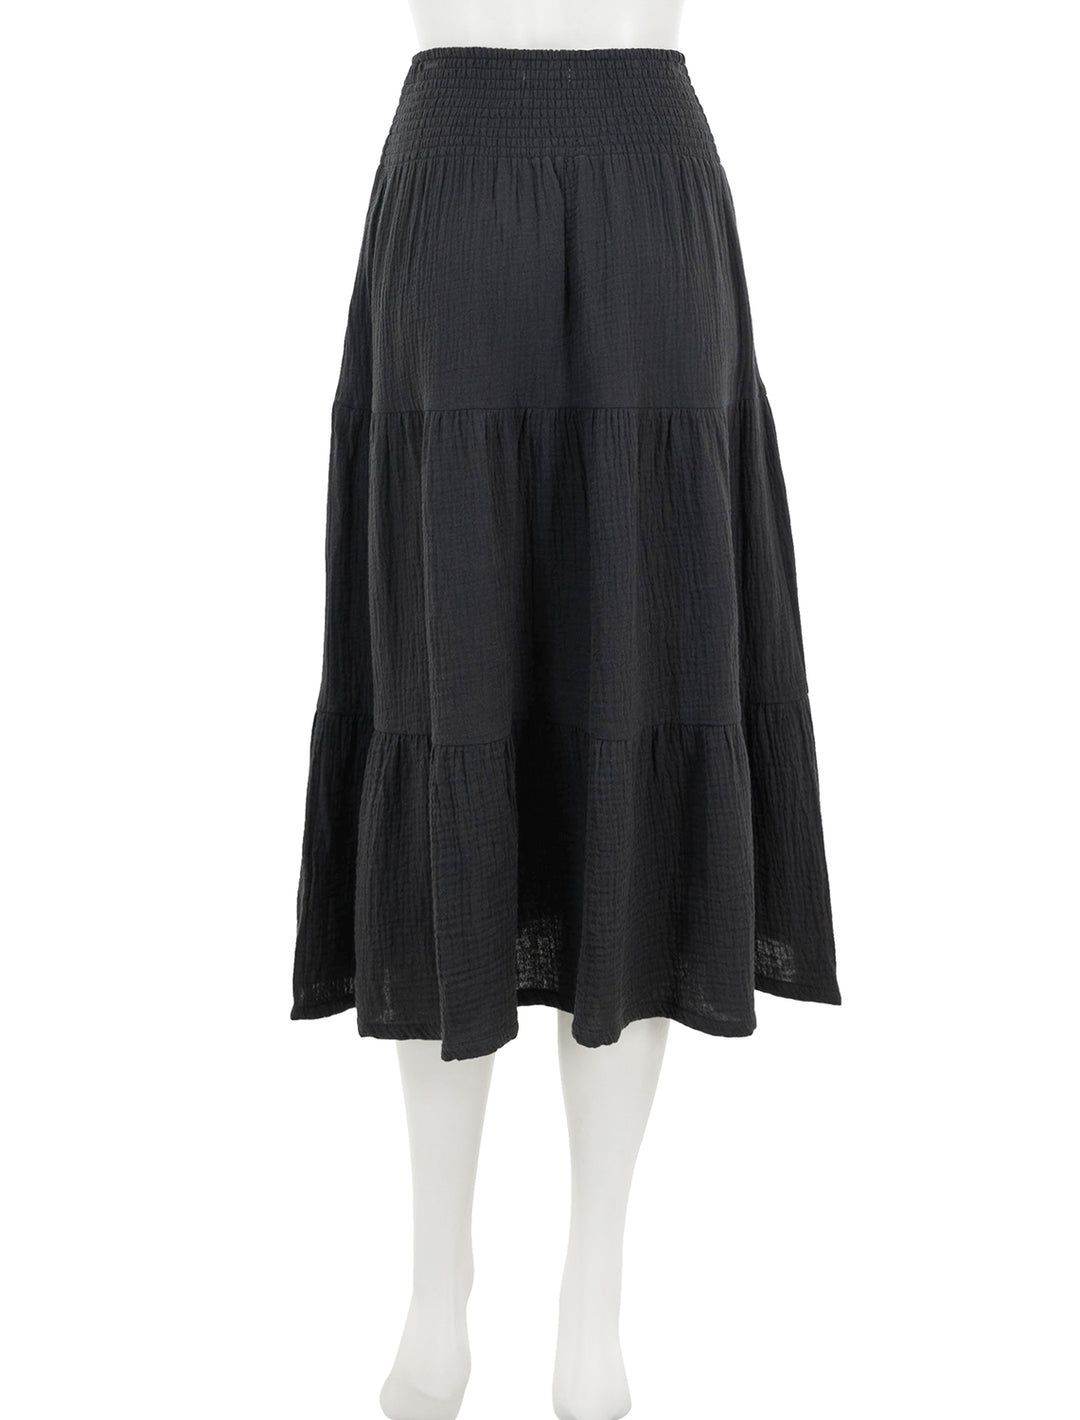 Back view of marine layer's corinne smocked waist maxi skirt in black.